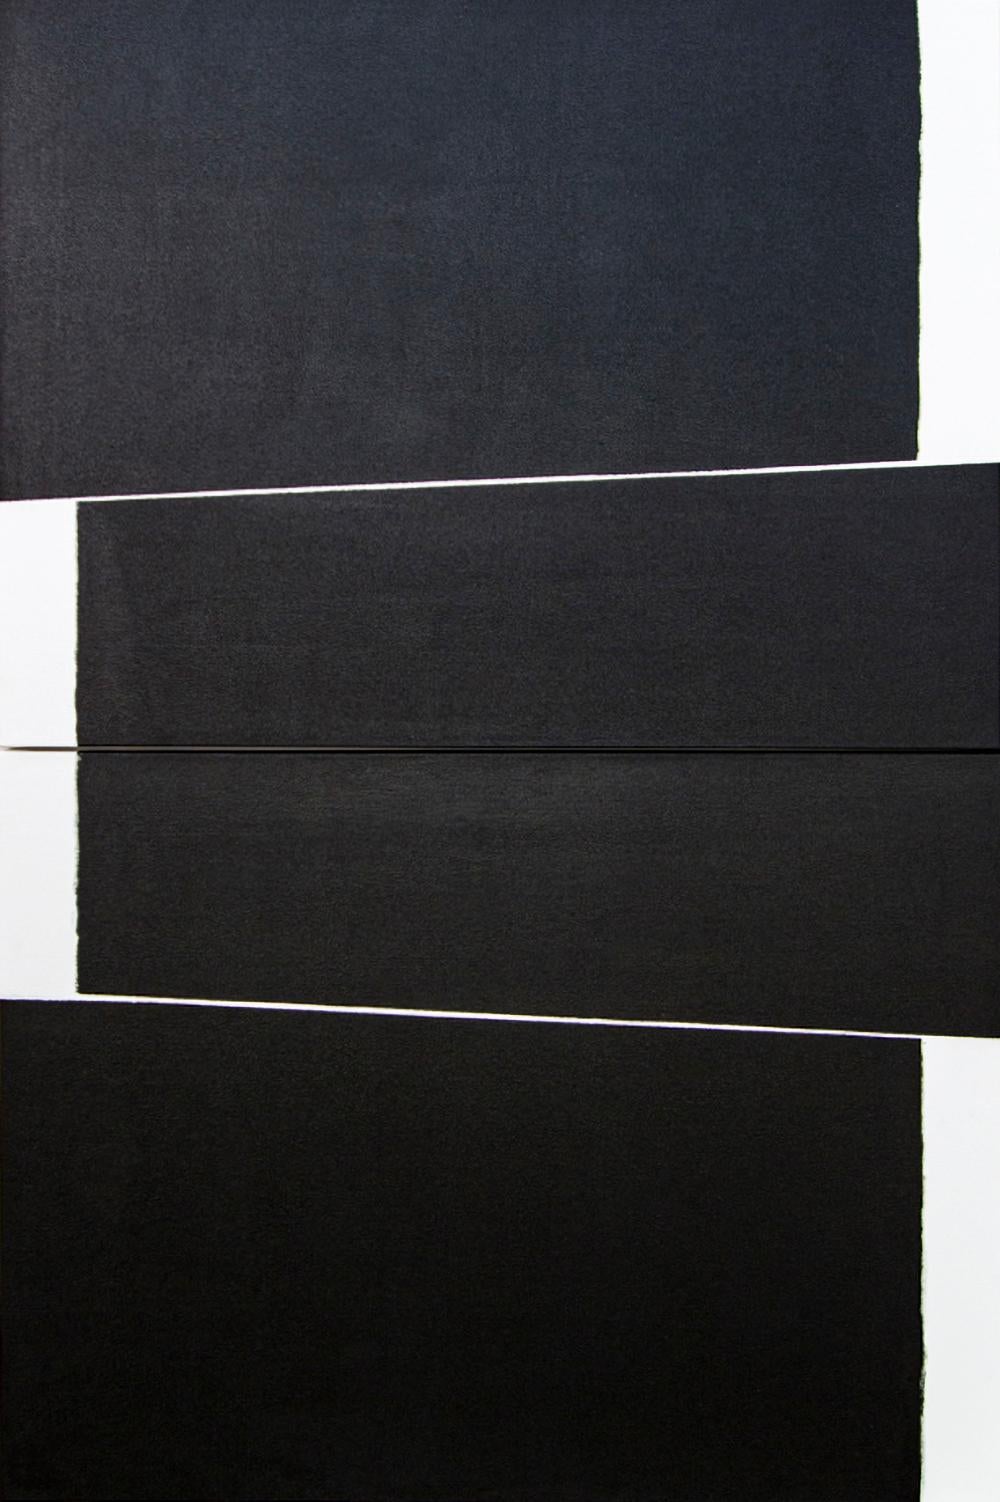 From his seaside studio in Blue Rocks, Nova Scotia abstract artist Tim Forbes continues his exploration of minimalism--bold jet-black forms on white canvas. 

With Slope 01 02, a diptych, Forbes uses algorithms—mathematical, repeated patterns to